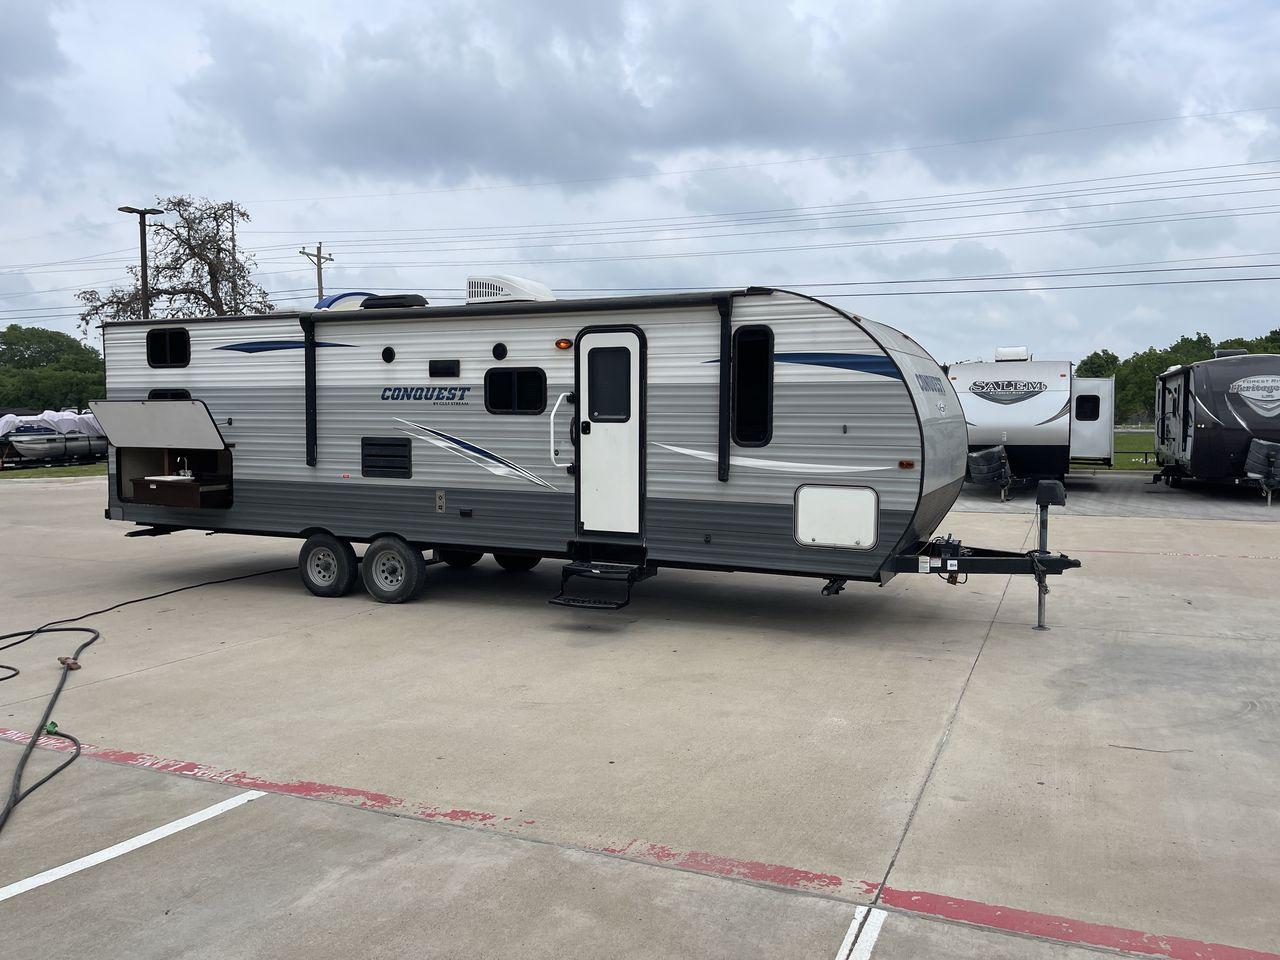 2019 GULF STREAM CONQUEST 274QB (1NL1G3226K1) , Length: 32.25 ft. | Dry Weight: 6,230 lbs. | Slides: 1 transmission, located at 4319 N Main Street, Cleburne, TX, 76033, (817) 221-0660, 32.435829, -97.384178 - The 2019 Gulf Stream 274QB is a dual-axle steel-wheel set-up that measures 32.25 ft. in length. It has a dry weight of 6,230 lbs. and a payload capacity of 1,918 lbs. It has automatic heating and cooling rated at 16,000 and 13,500 BTUs, respectively. It is also equipped with one power slide and a po - Photo #24